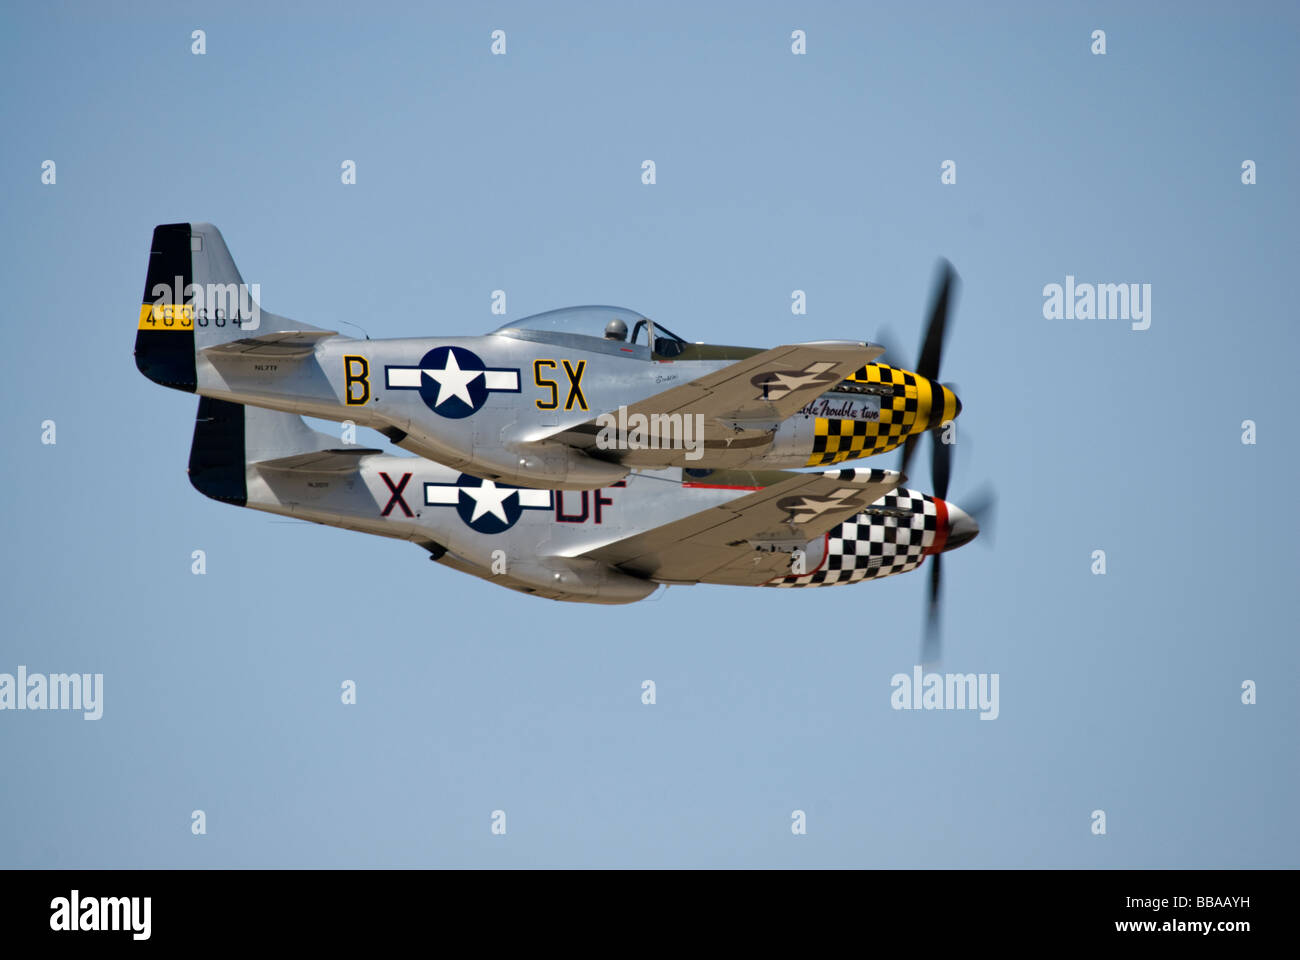 Two P-51 Mustangs fly a close formation Stock Photo